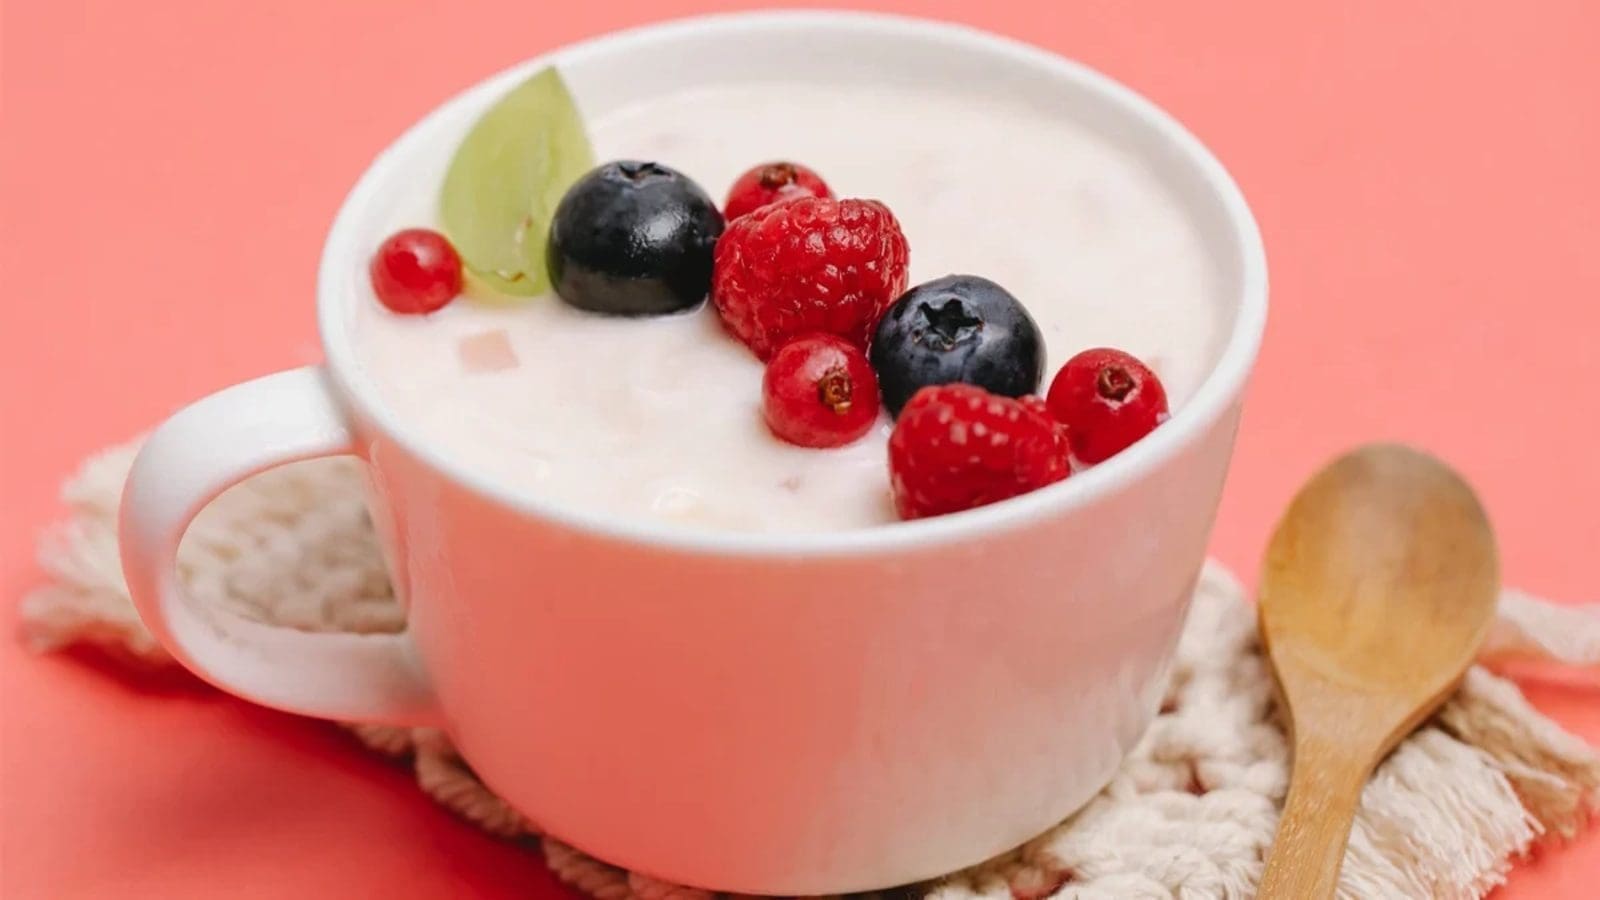 Wilk unveils project to produce world’s first yogurt using cell-cultured milk fat